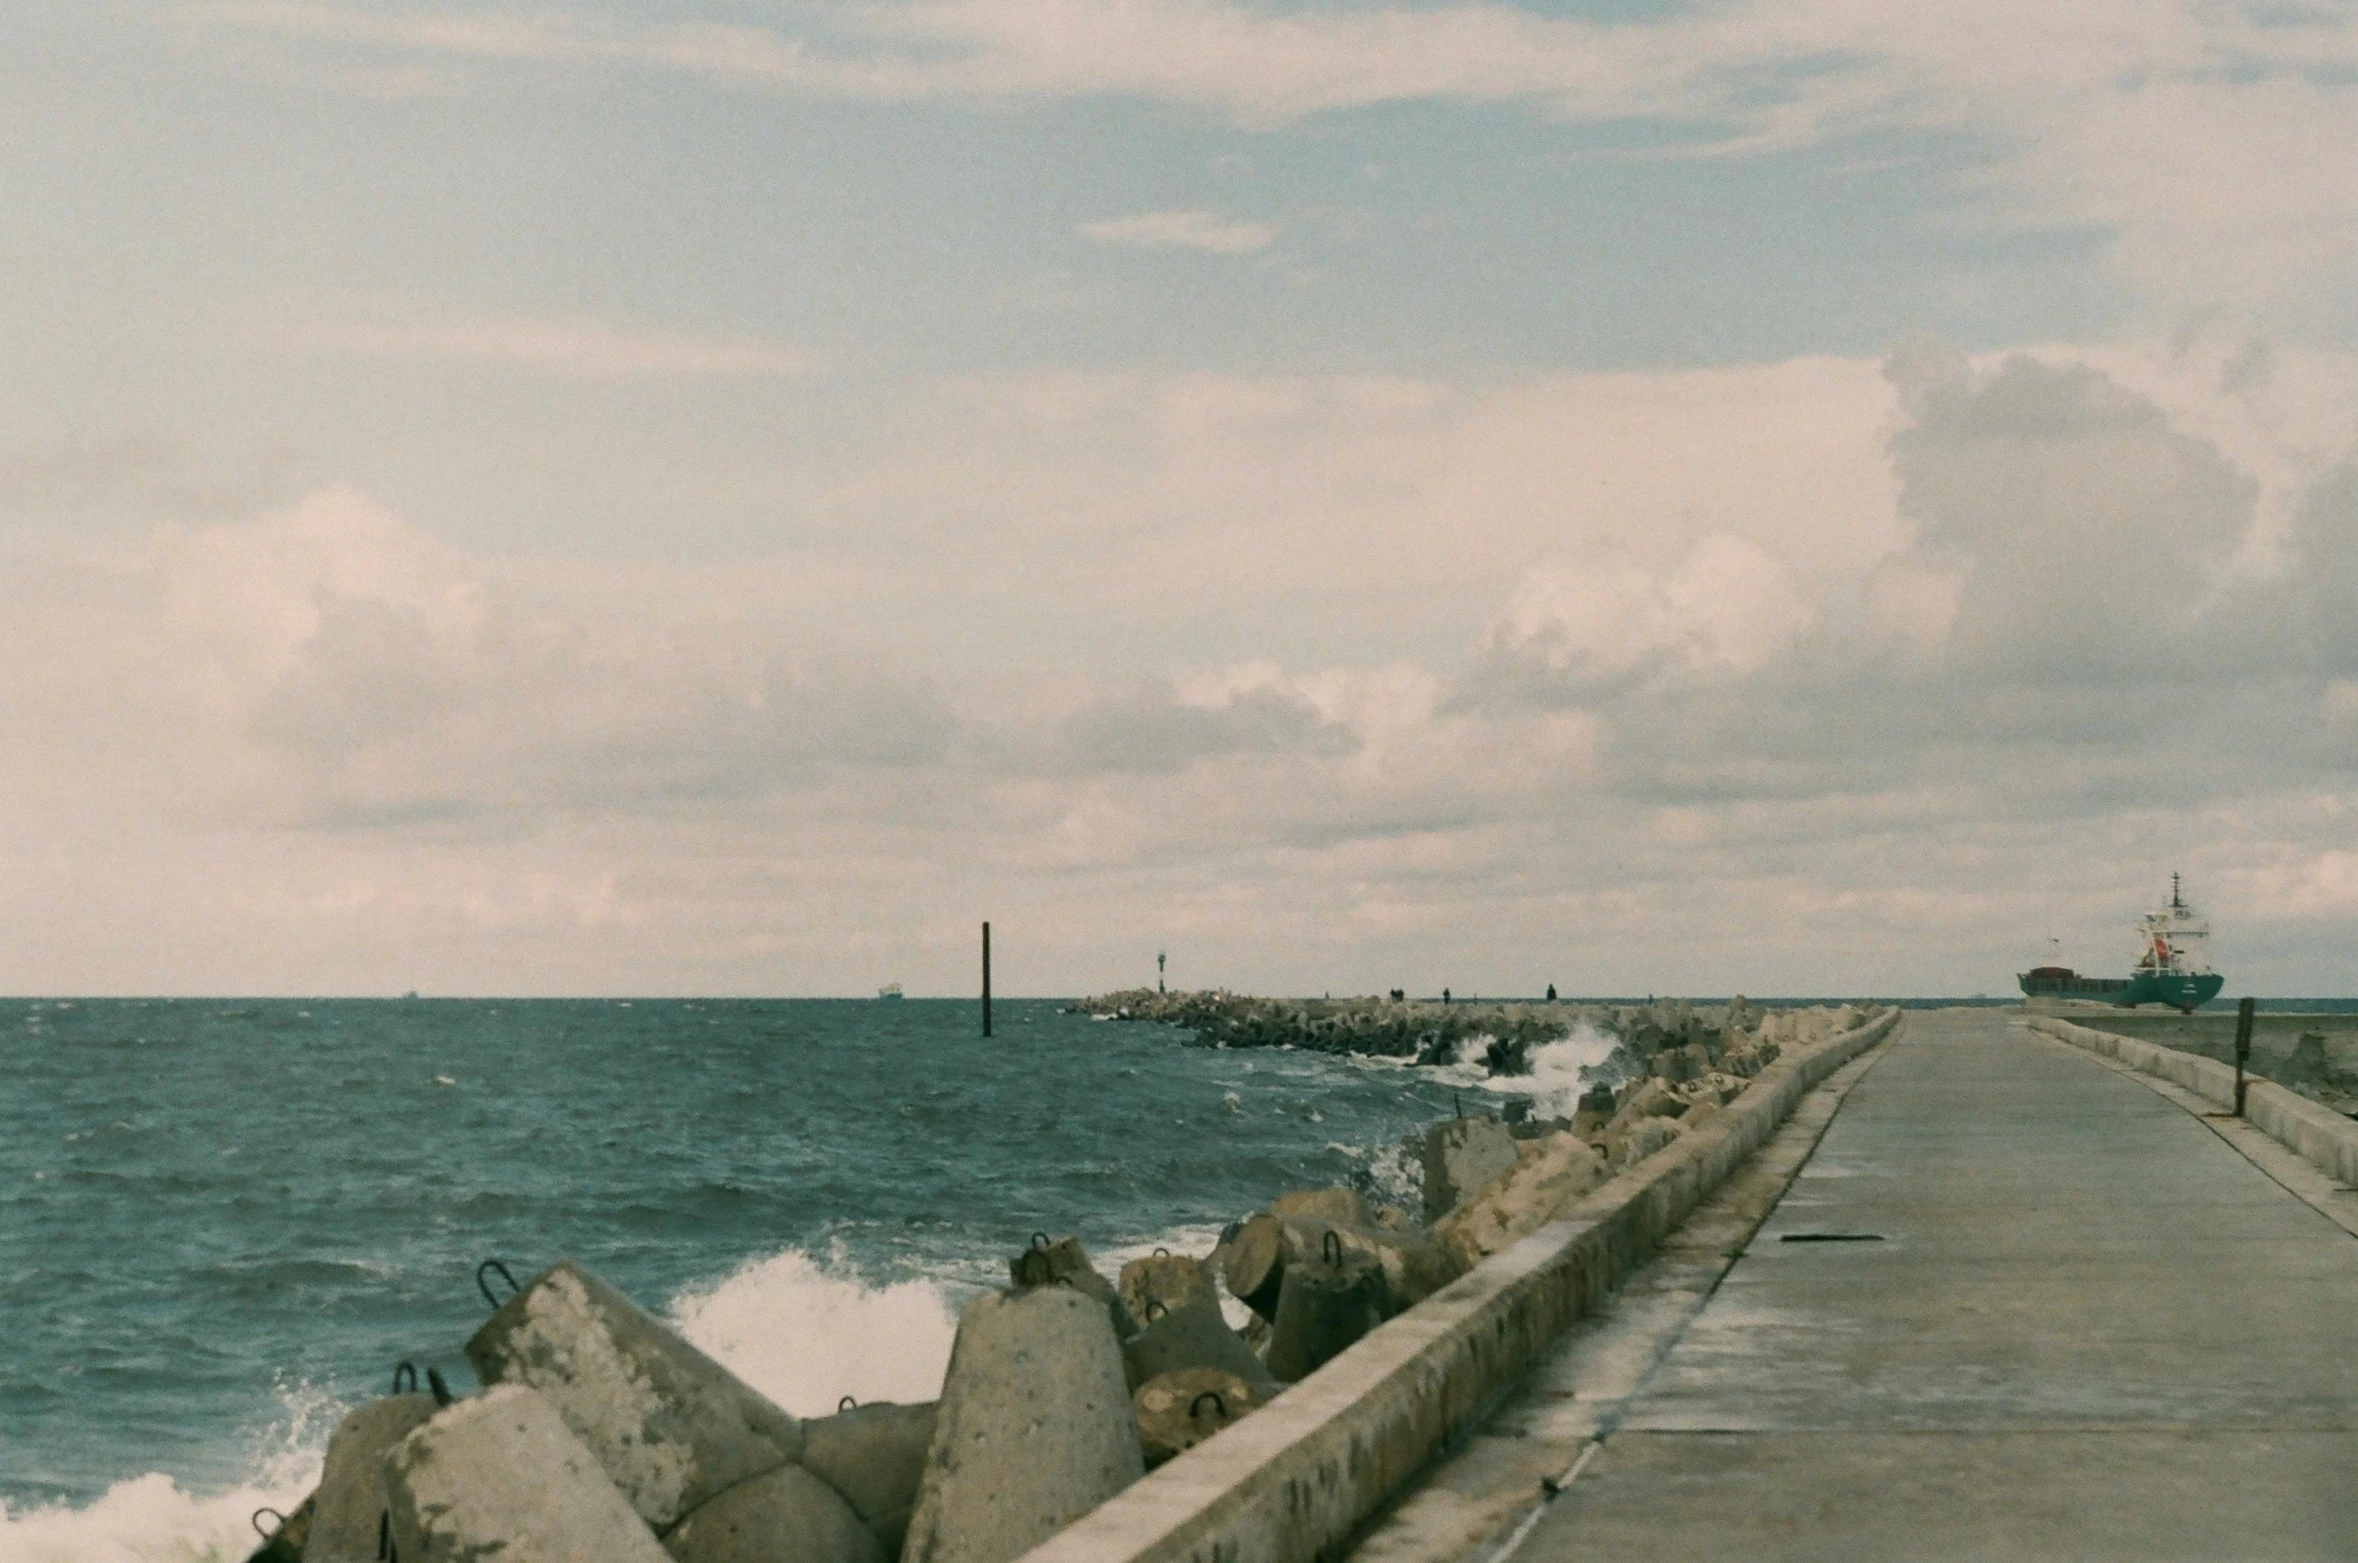 a man riding a skateboard down a sidewalk next to the ocean, a picture, unsplash, happening, near a jetty, vintage color, rocky seashore, harbour